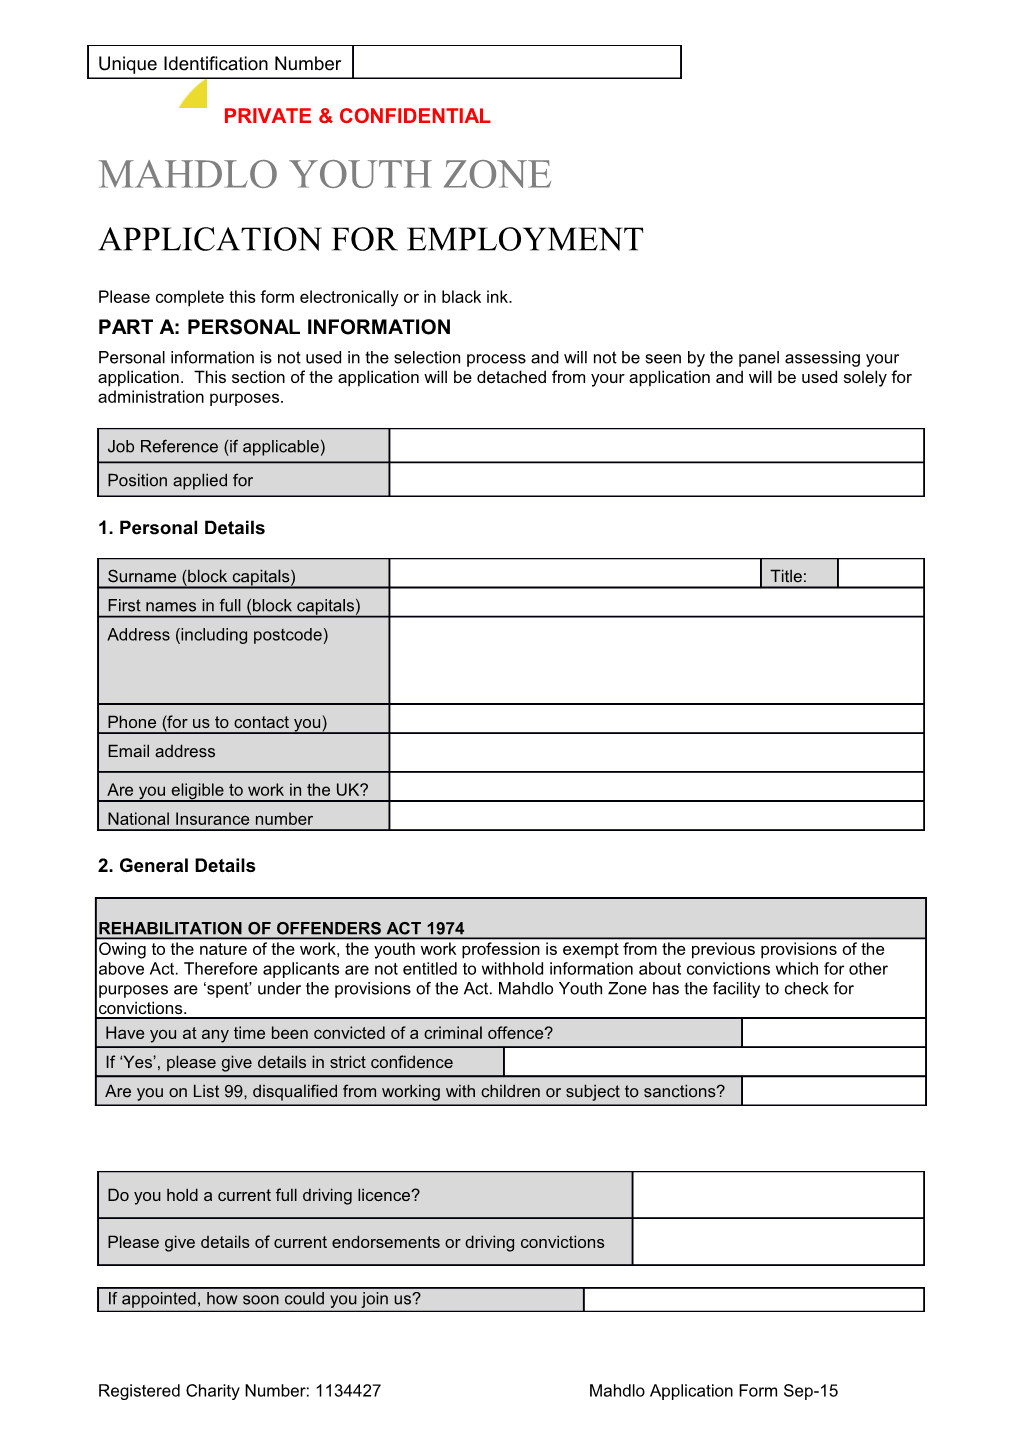 Please Complete This Form Electronically Or in Black Ink